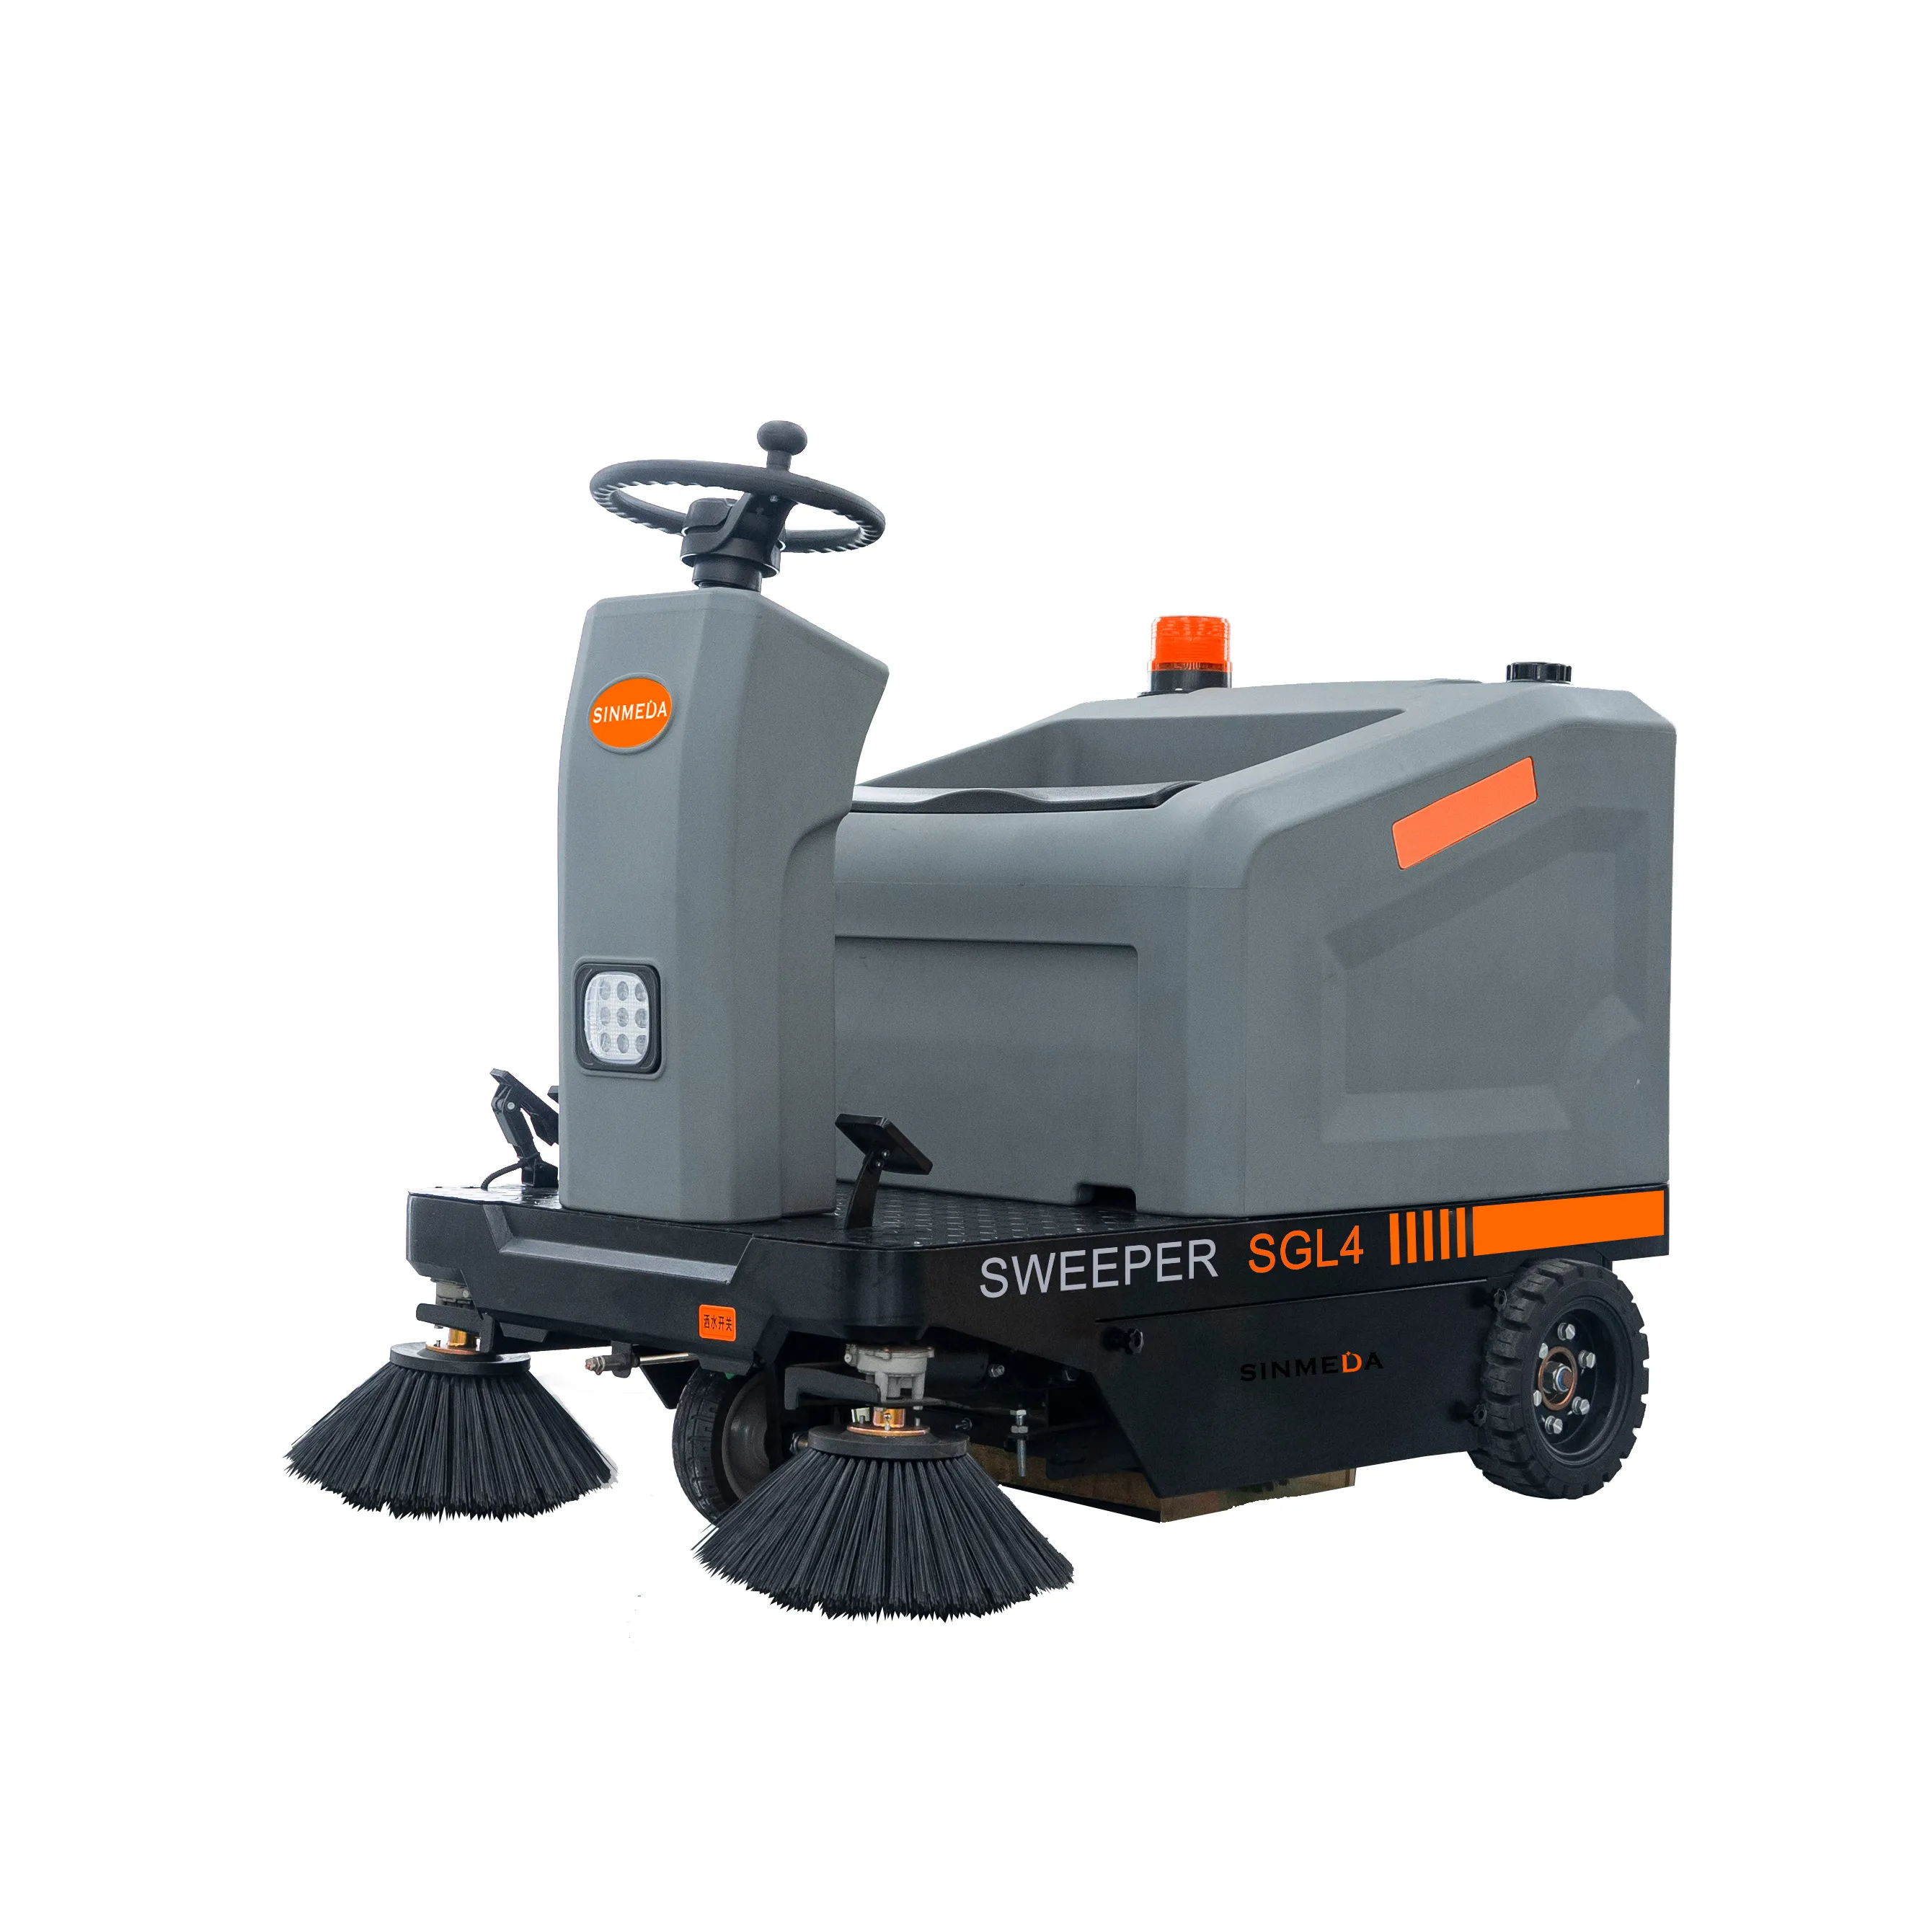 Heavy Duty Electric Industrial Washer & Chimney Sweeper Use Made of Plastic Double Brush Ride-on with Pump & Motor for Home 267